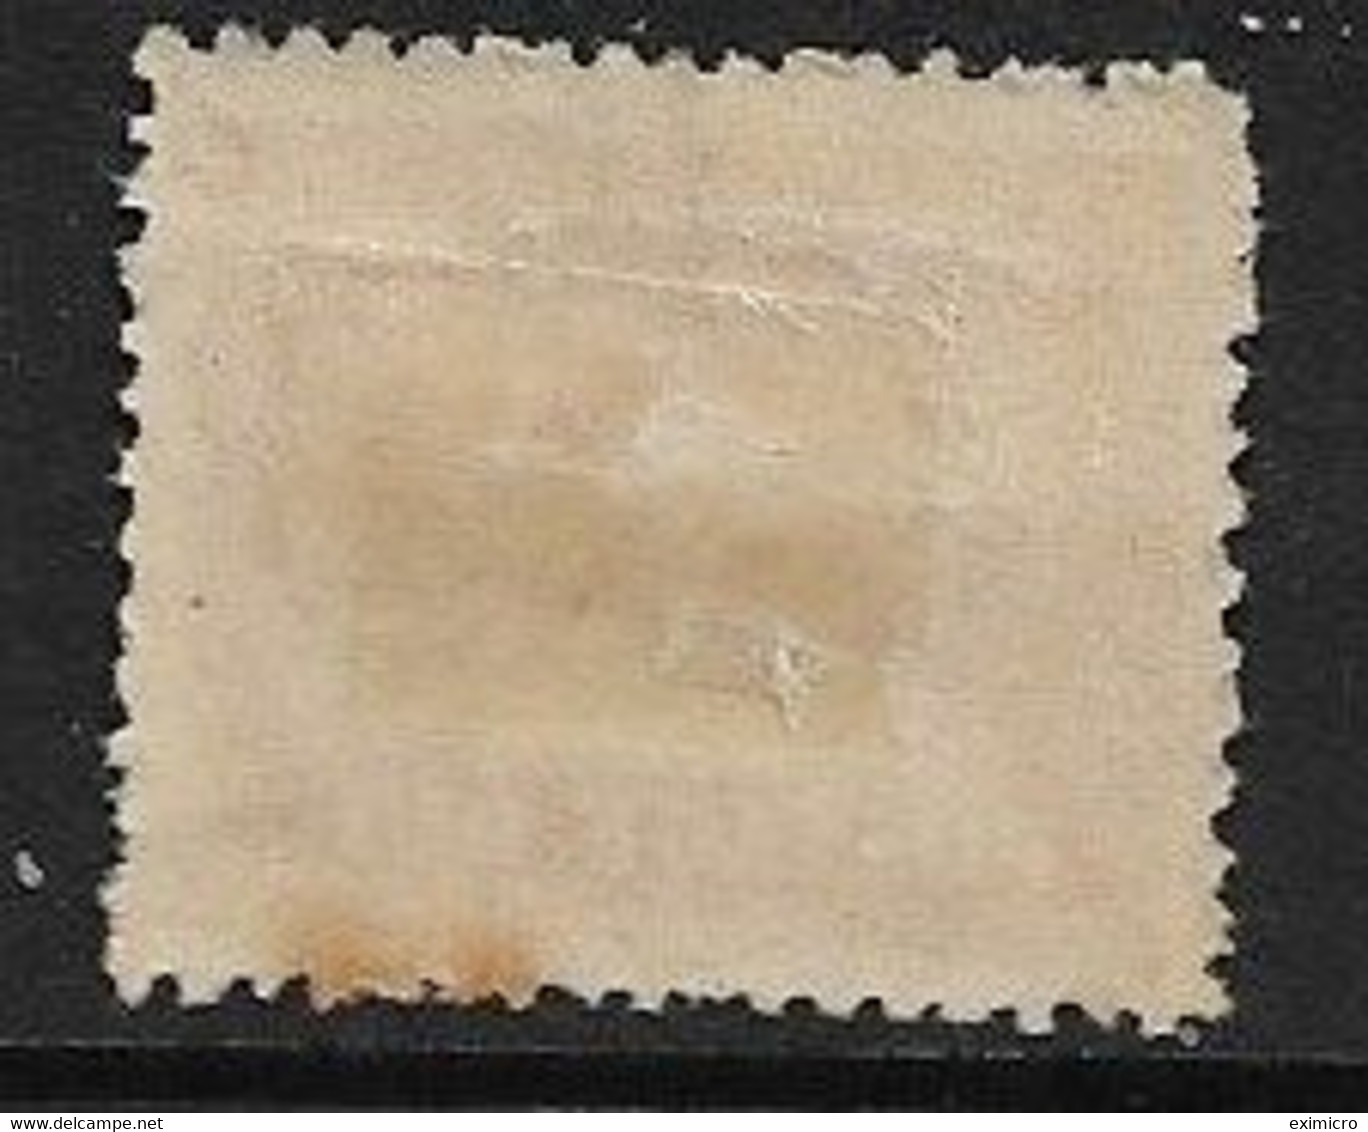 NEW ZEALAND 1943 - 1949 3d POSTAGE DUE FINE USED - WATERMARK UNCHECKED, FINE USED Minimum Cat £17 - Timbres-taxe